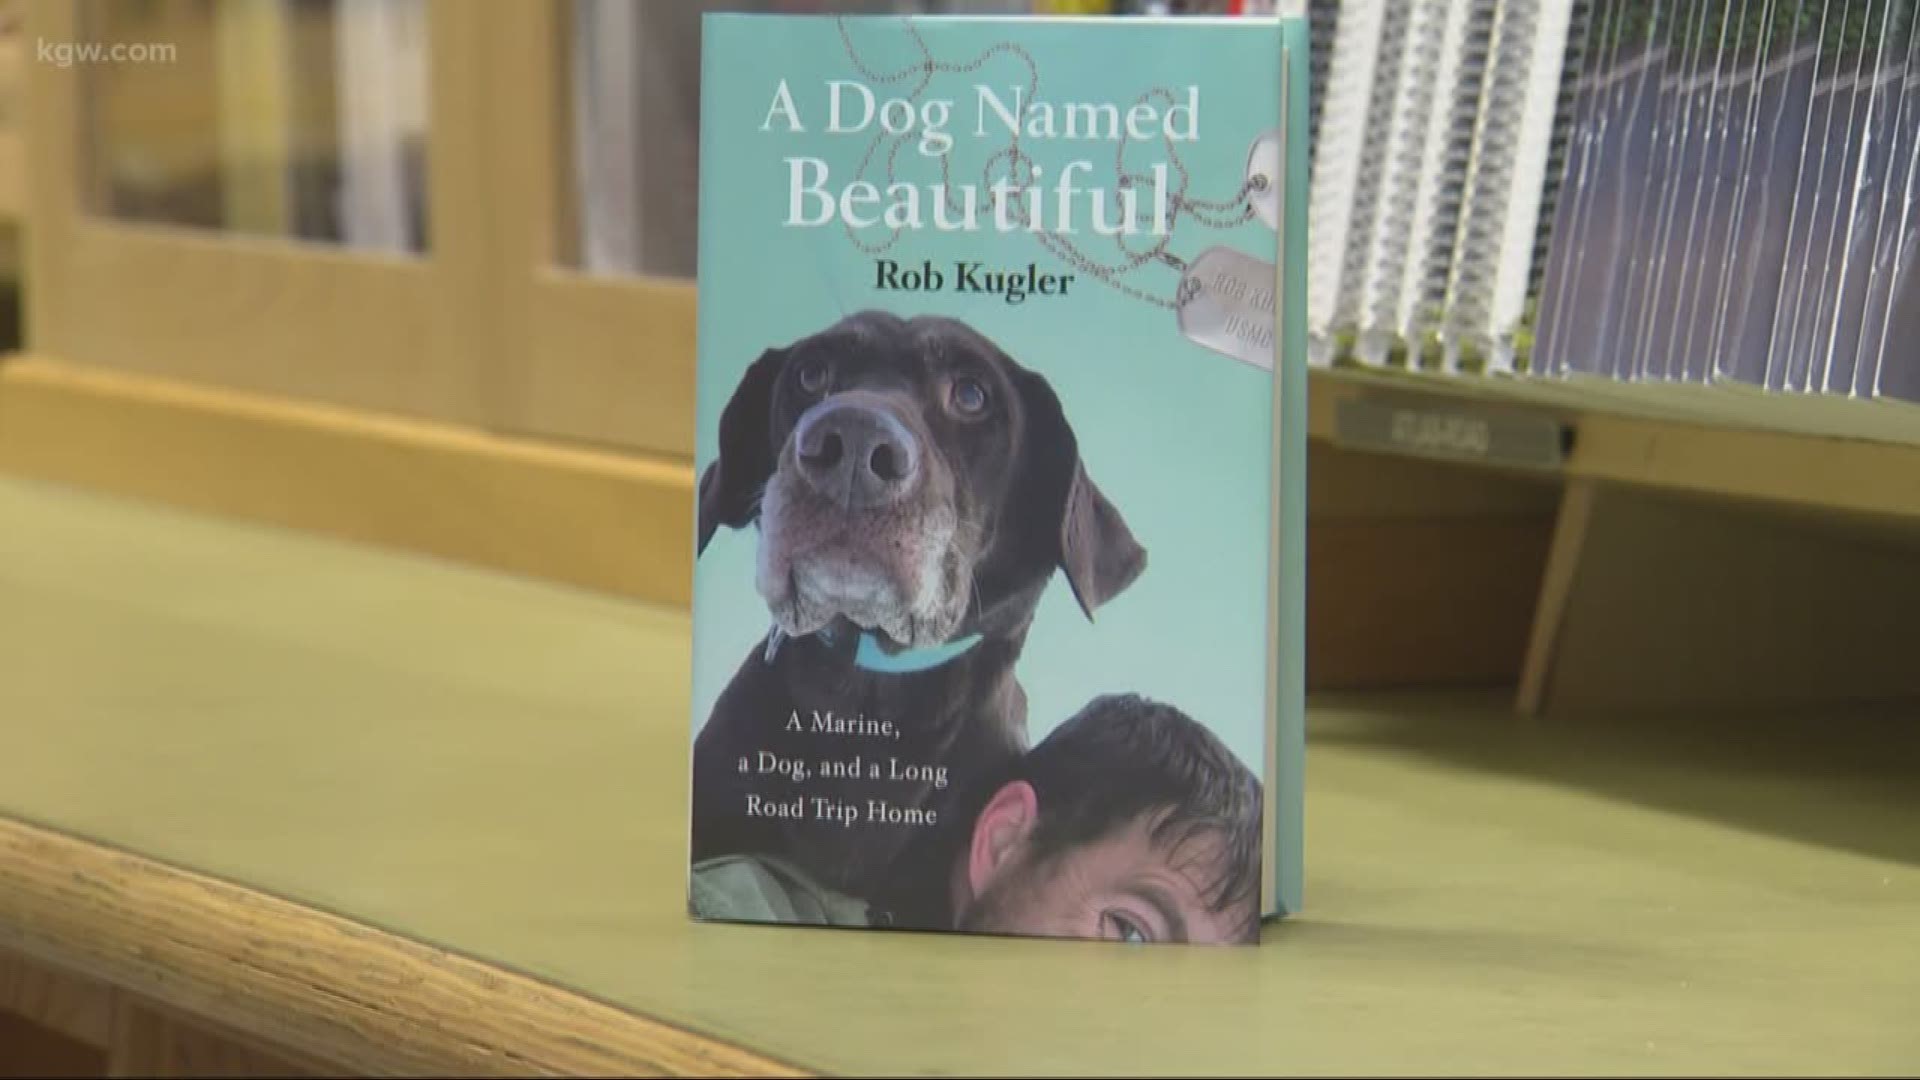 A local author uses a dog's death to give hope to others.